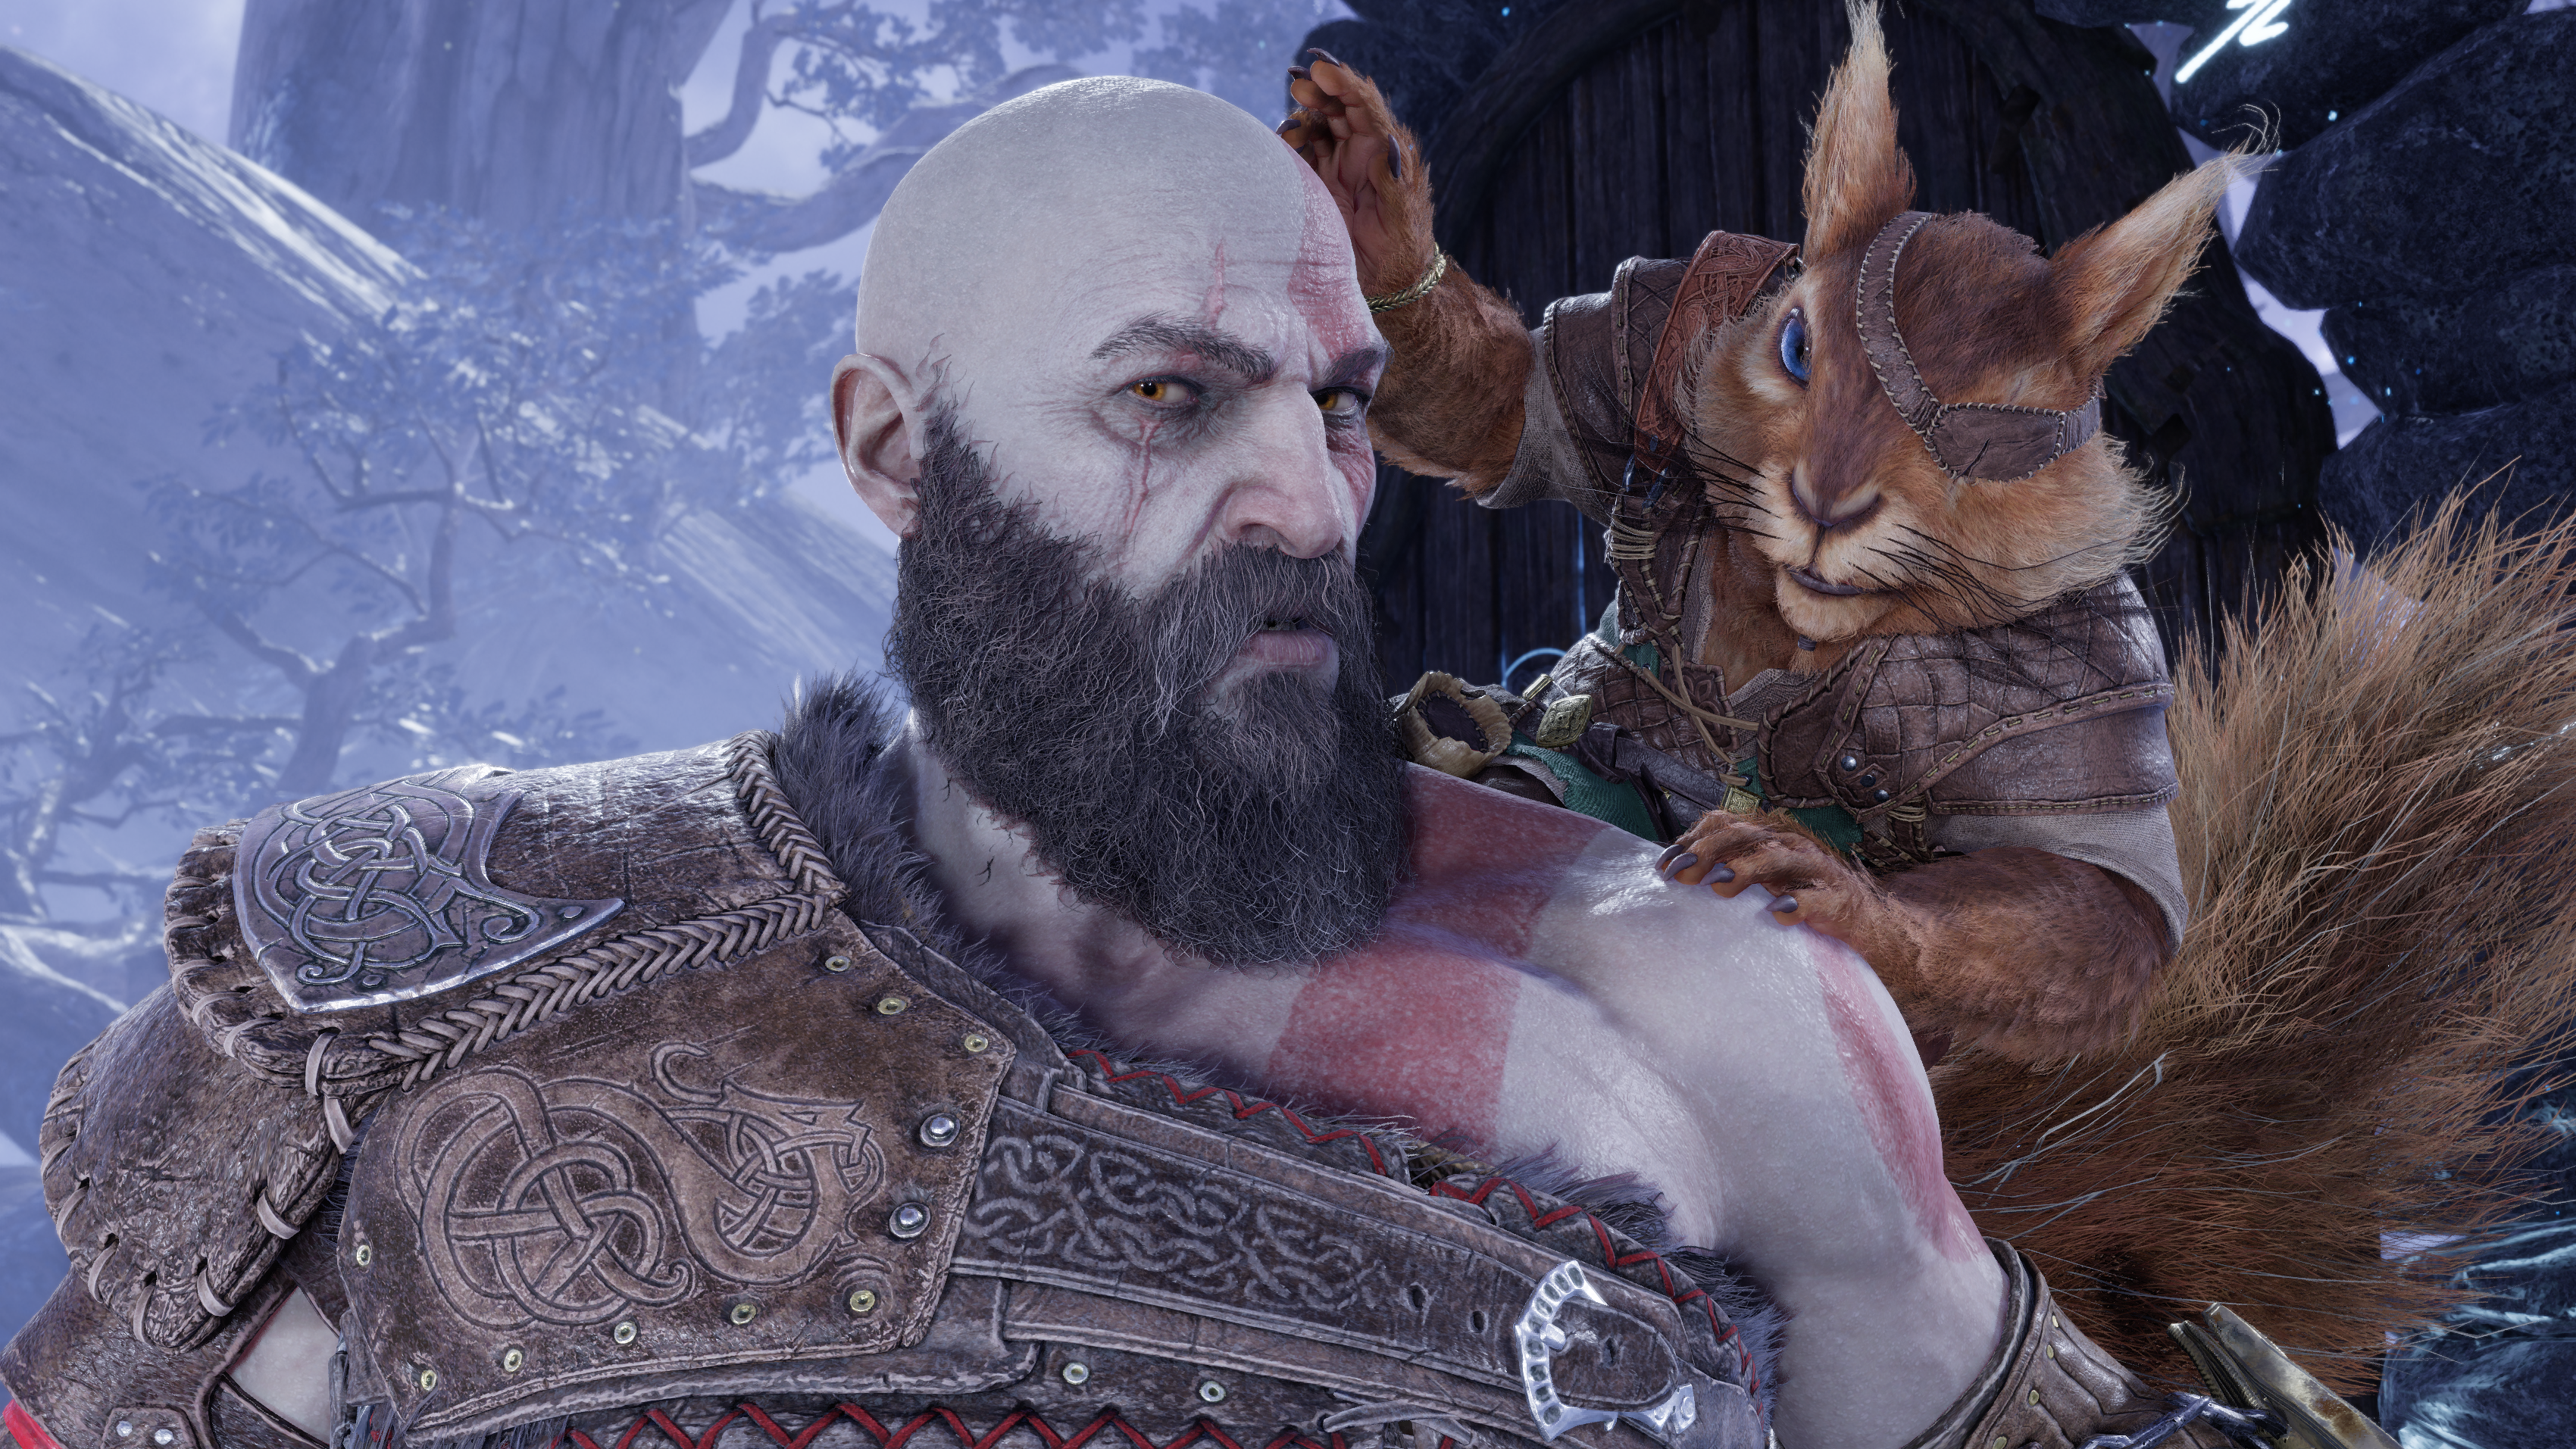 God of War Ragnarok review - Kratos gives the side eye to a talking squirrel with an eyepatch sat on his shoulder